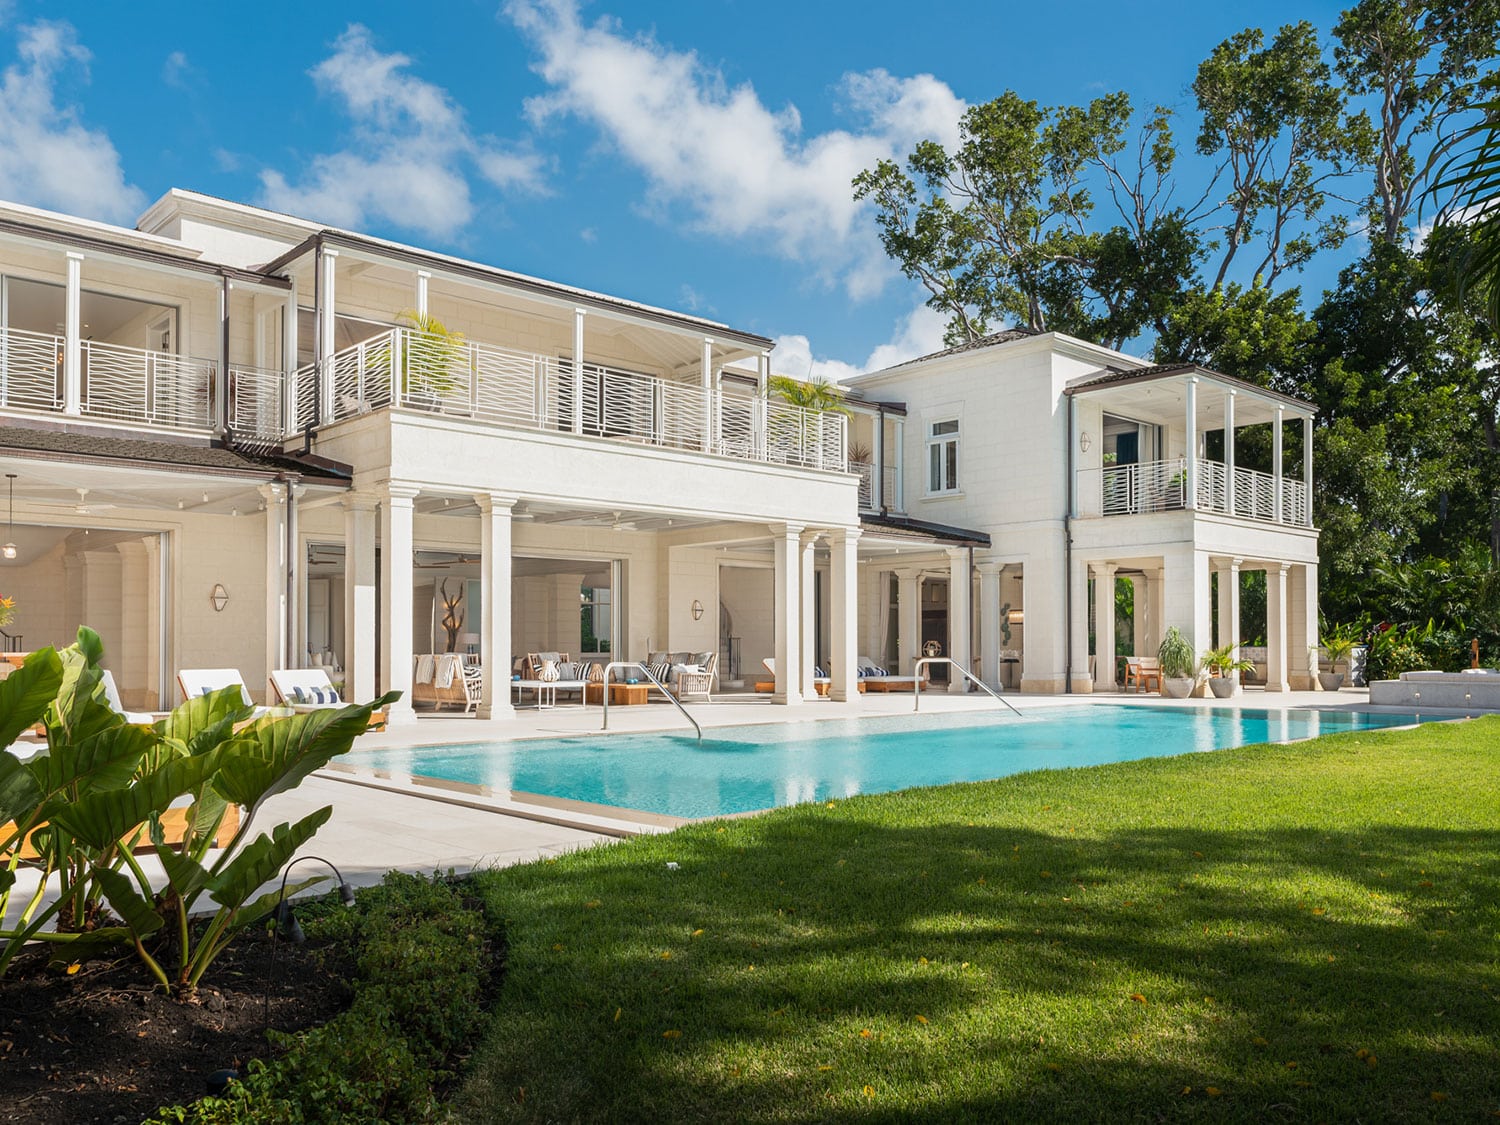 The luxurious Villa Tamarindo in Barbados was designed by the island’s famous architect Larry Warren.